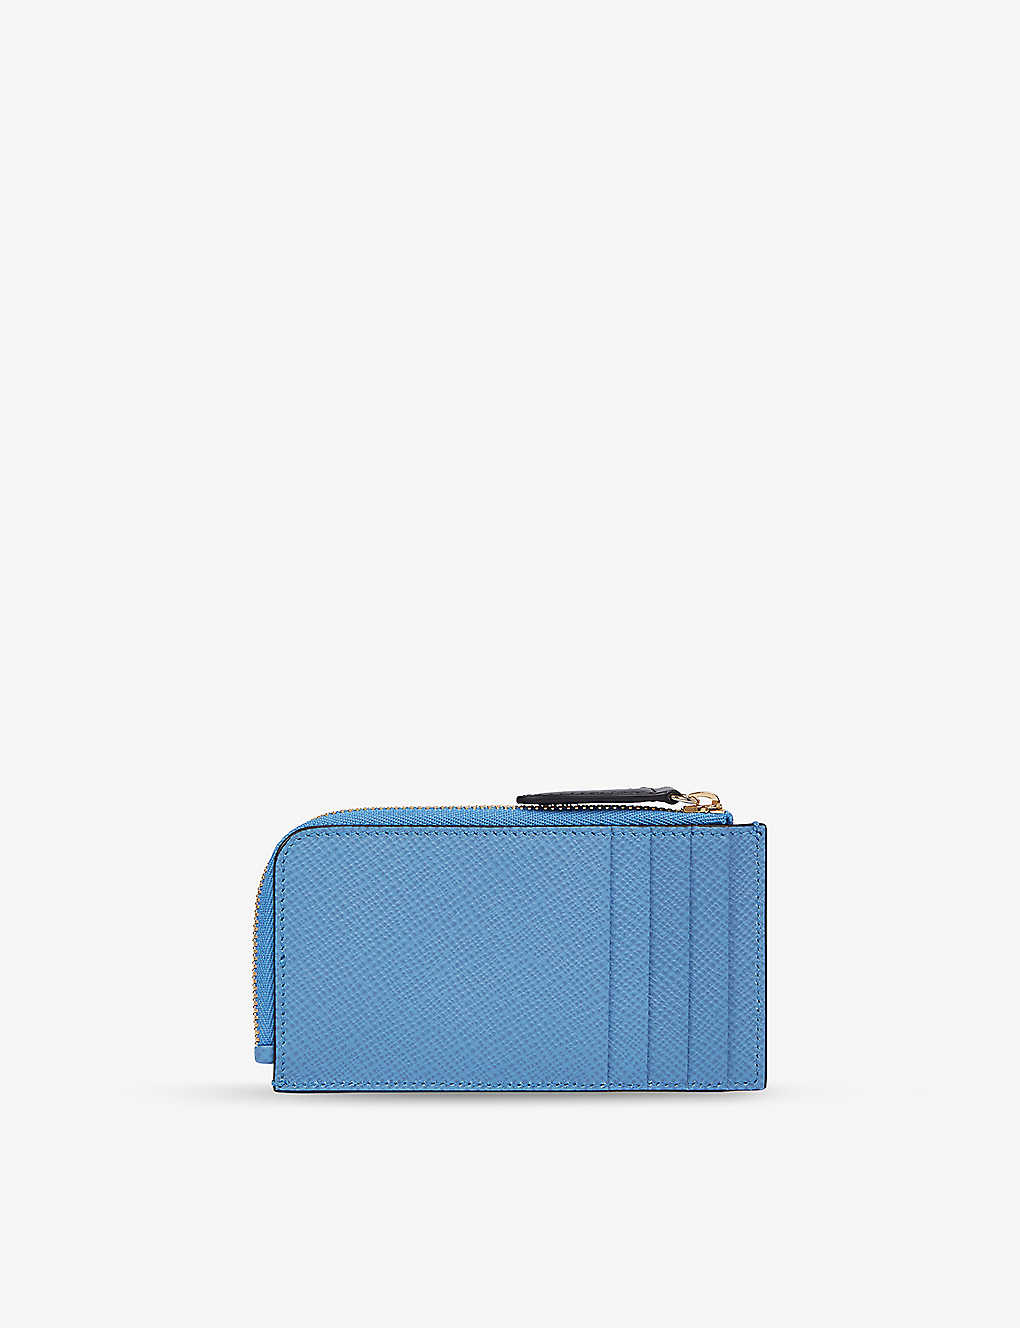 Smythson 4 Card Slot Coin Purse In Panama In Blue